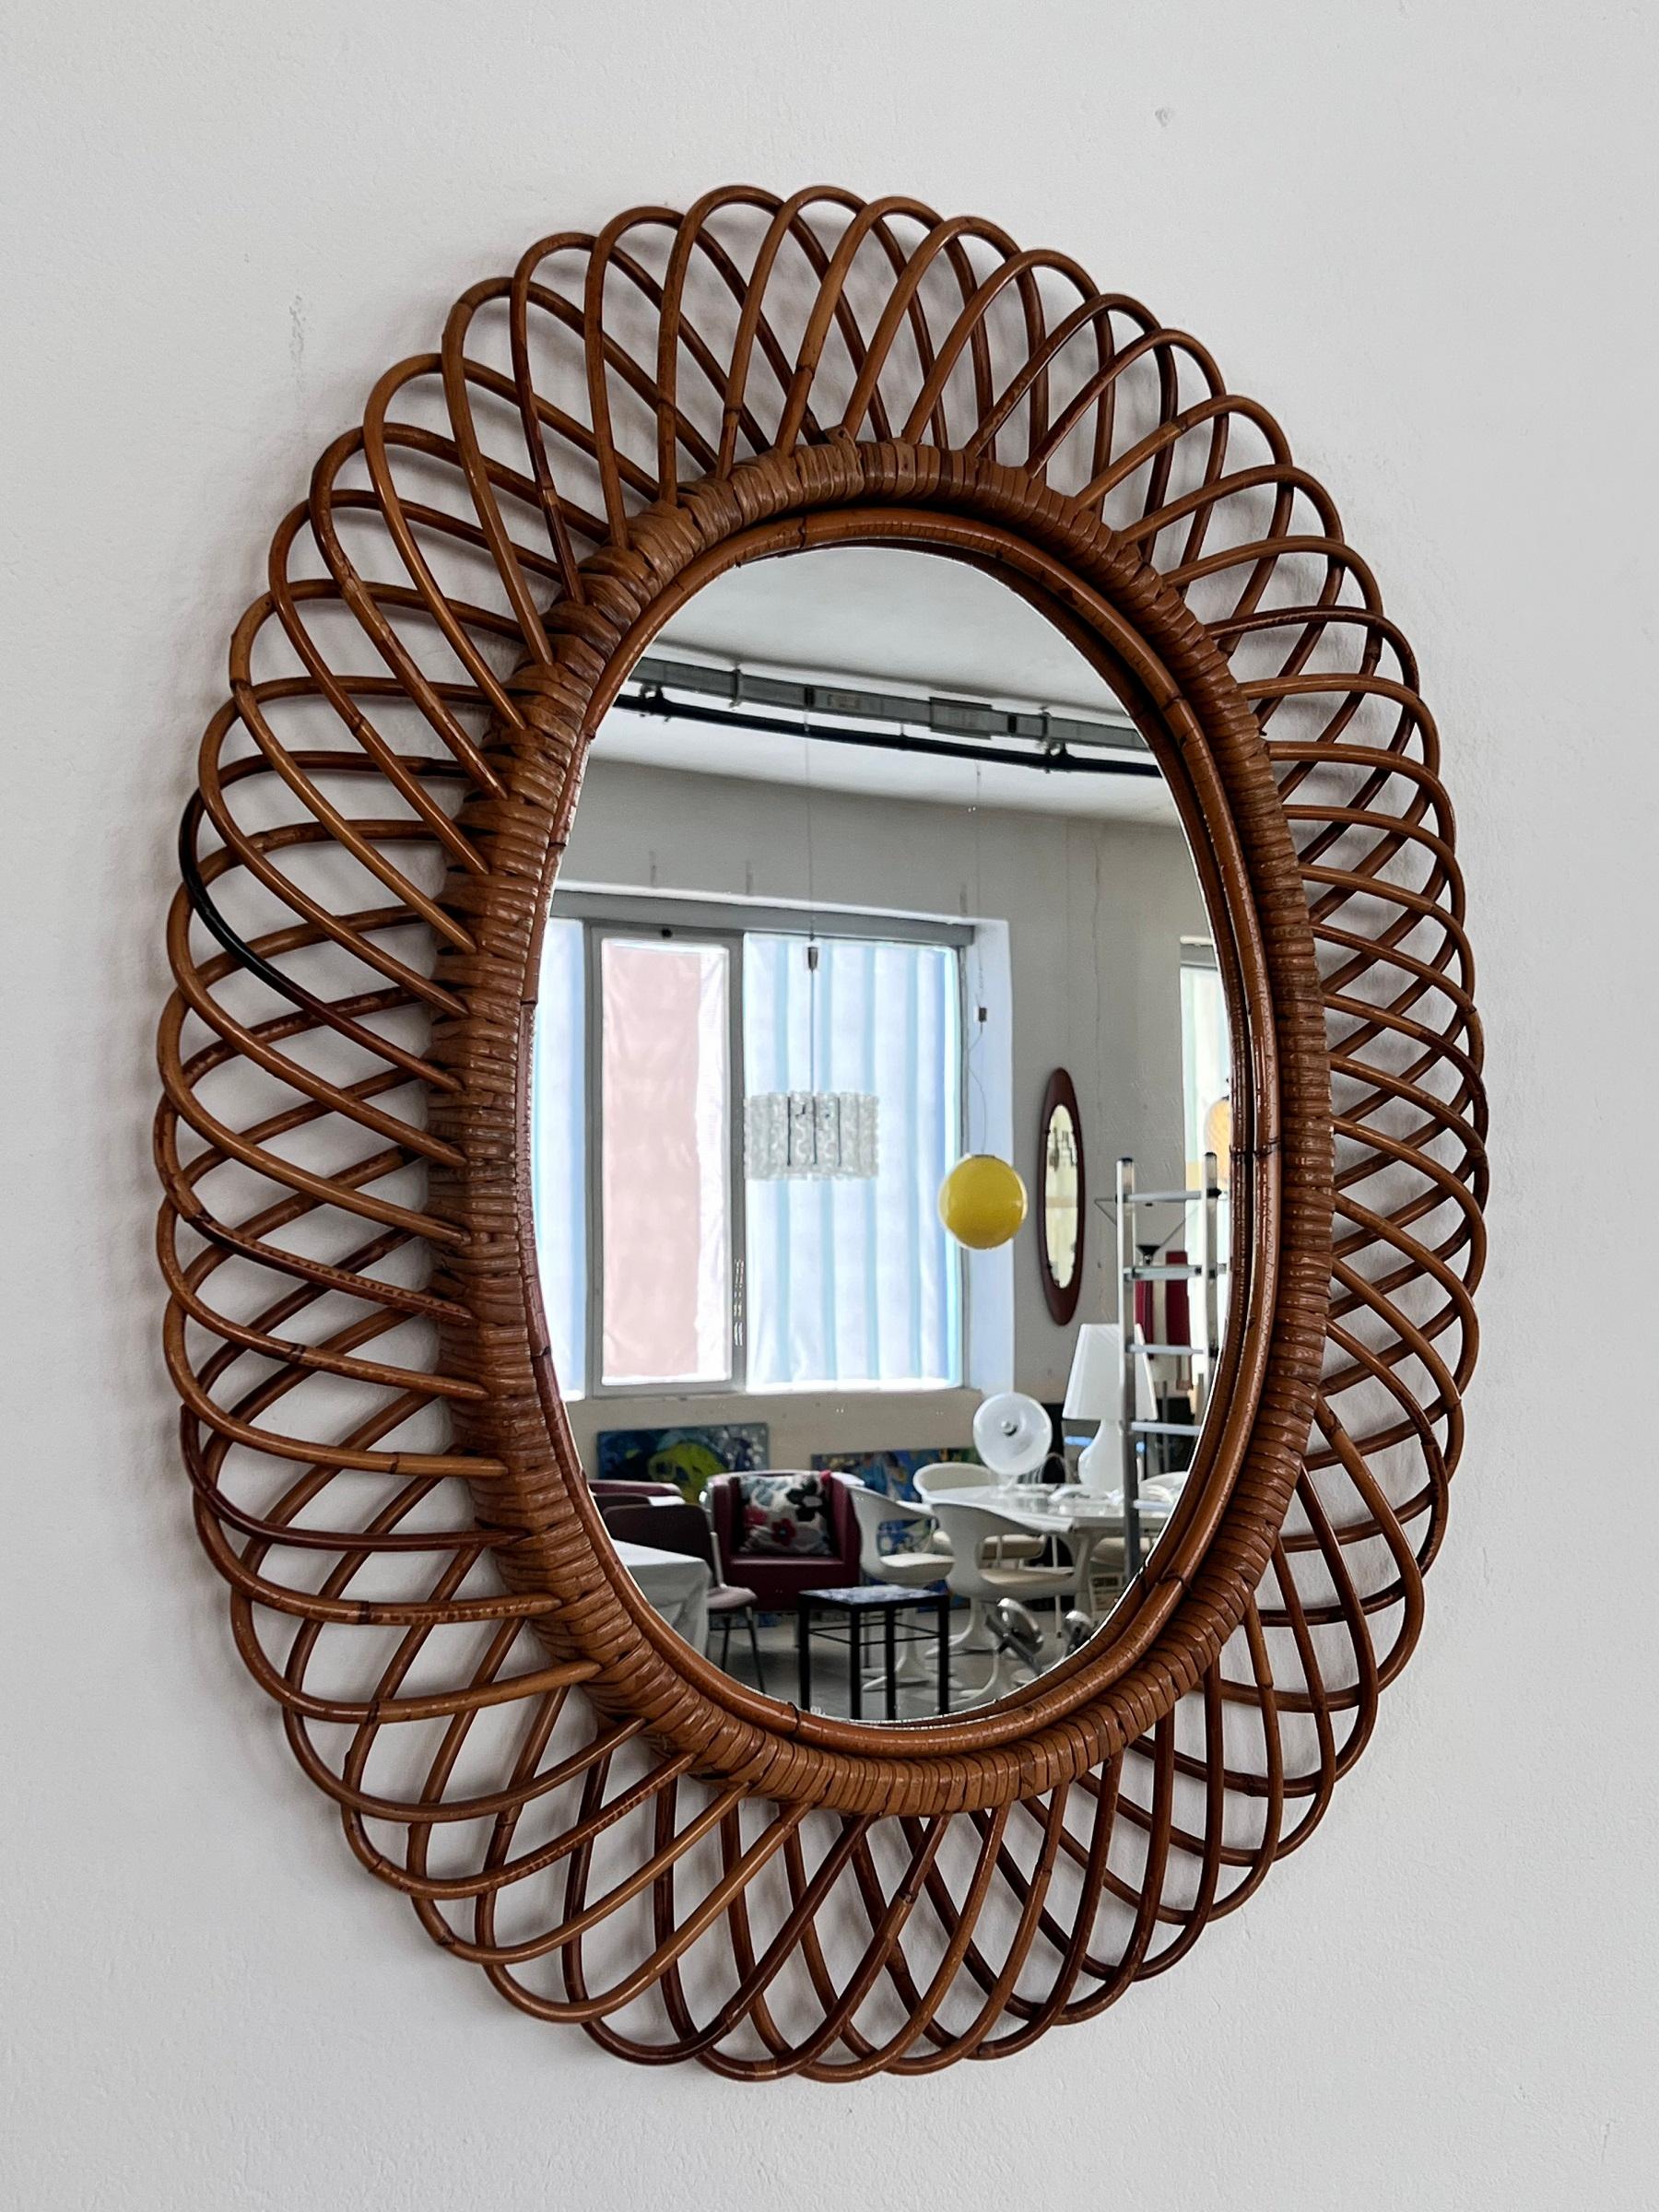 Italian Midcentury Oval Wall Mirror With Bamboo Frame Franco Albini Style, 1960s For Sale 1